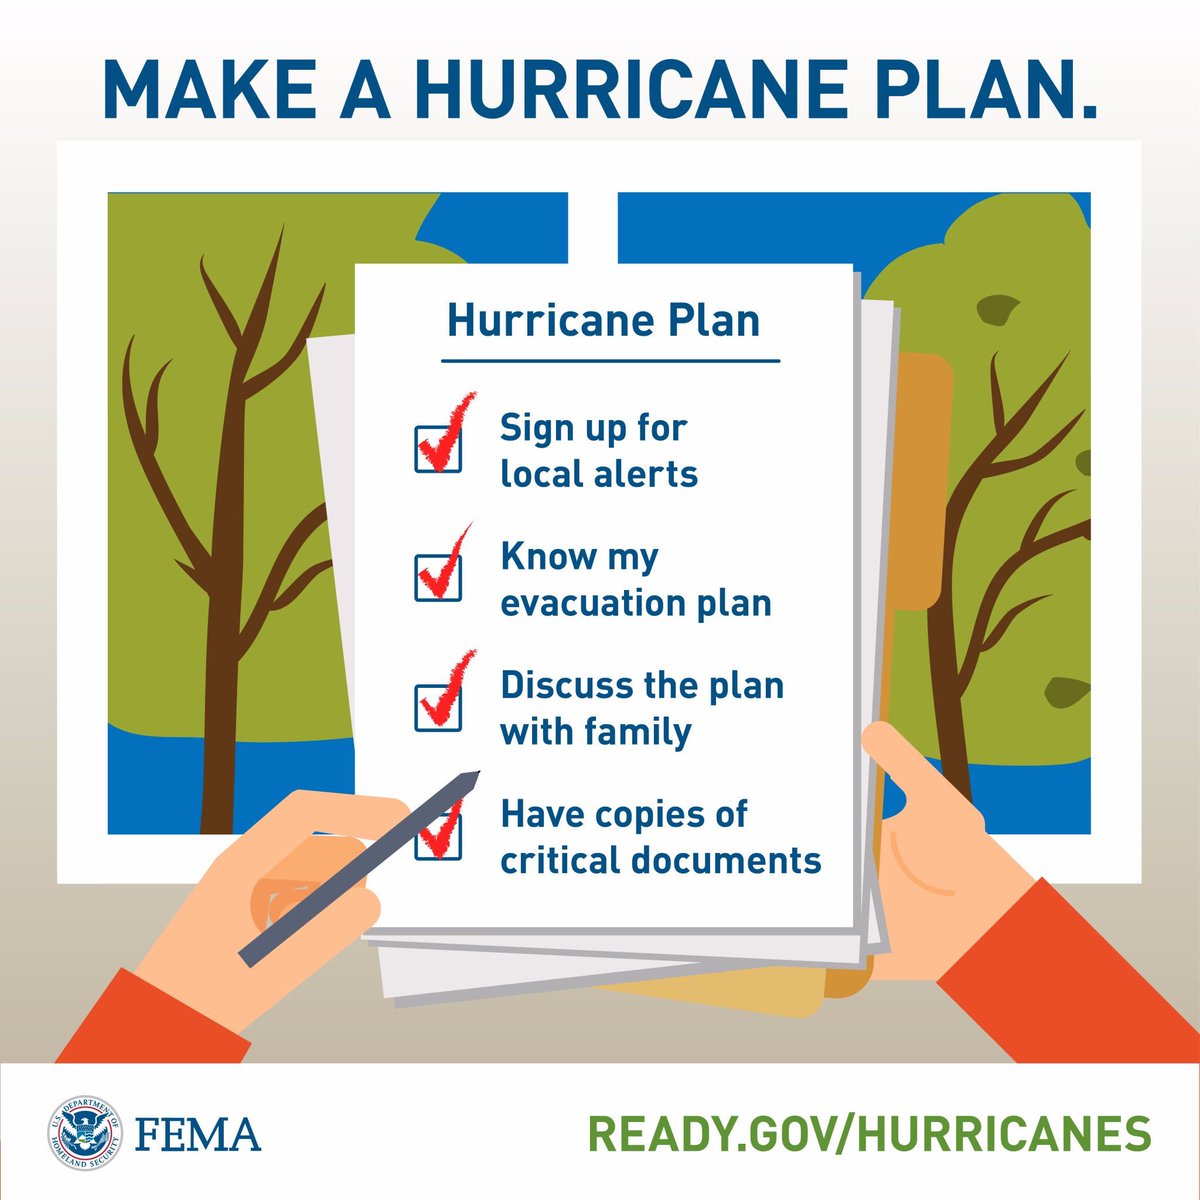 This Sunday, May 5th, is the star of #HurricanePreparednessWeek! Stay tuned for helpful tips all week long that will help you make sure you are prepared for the upcoming hurricane season. ➡️ ready.gov/hurricanes